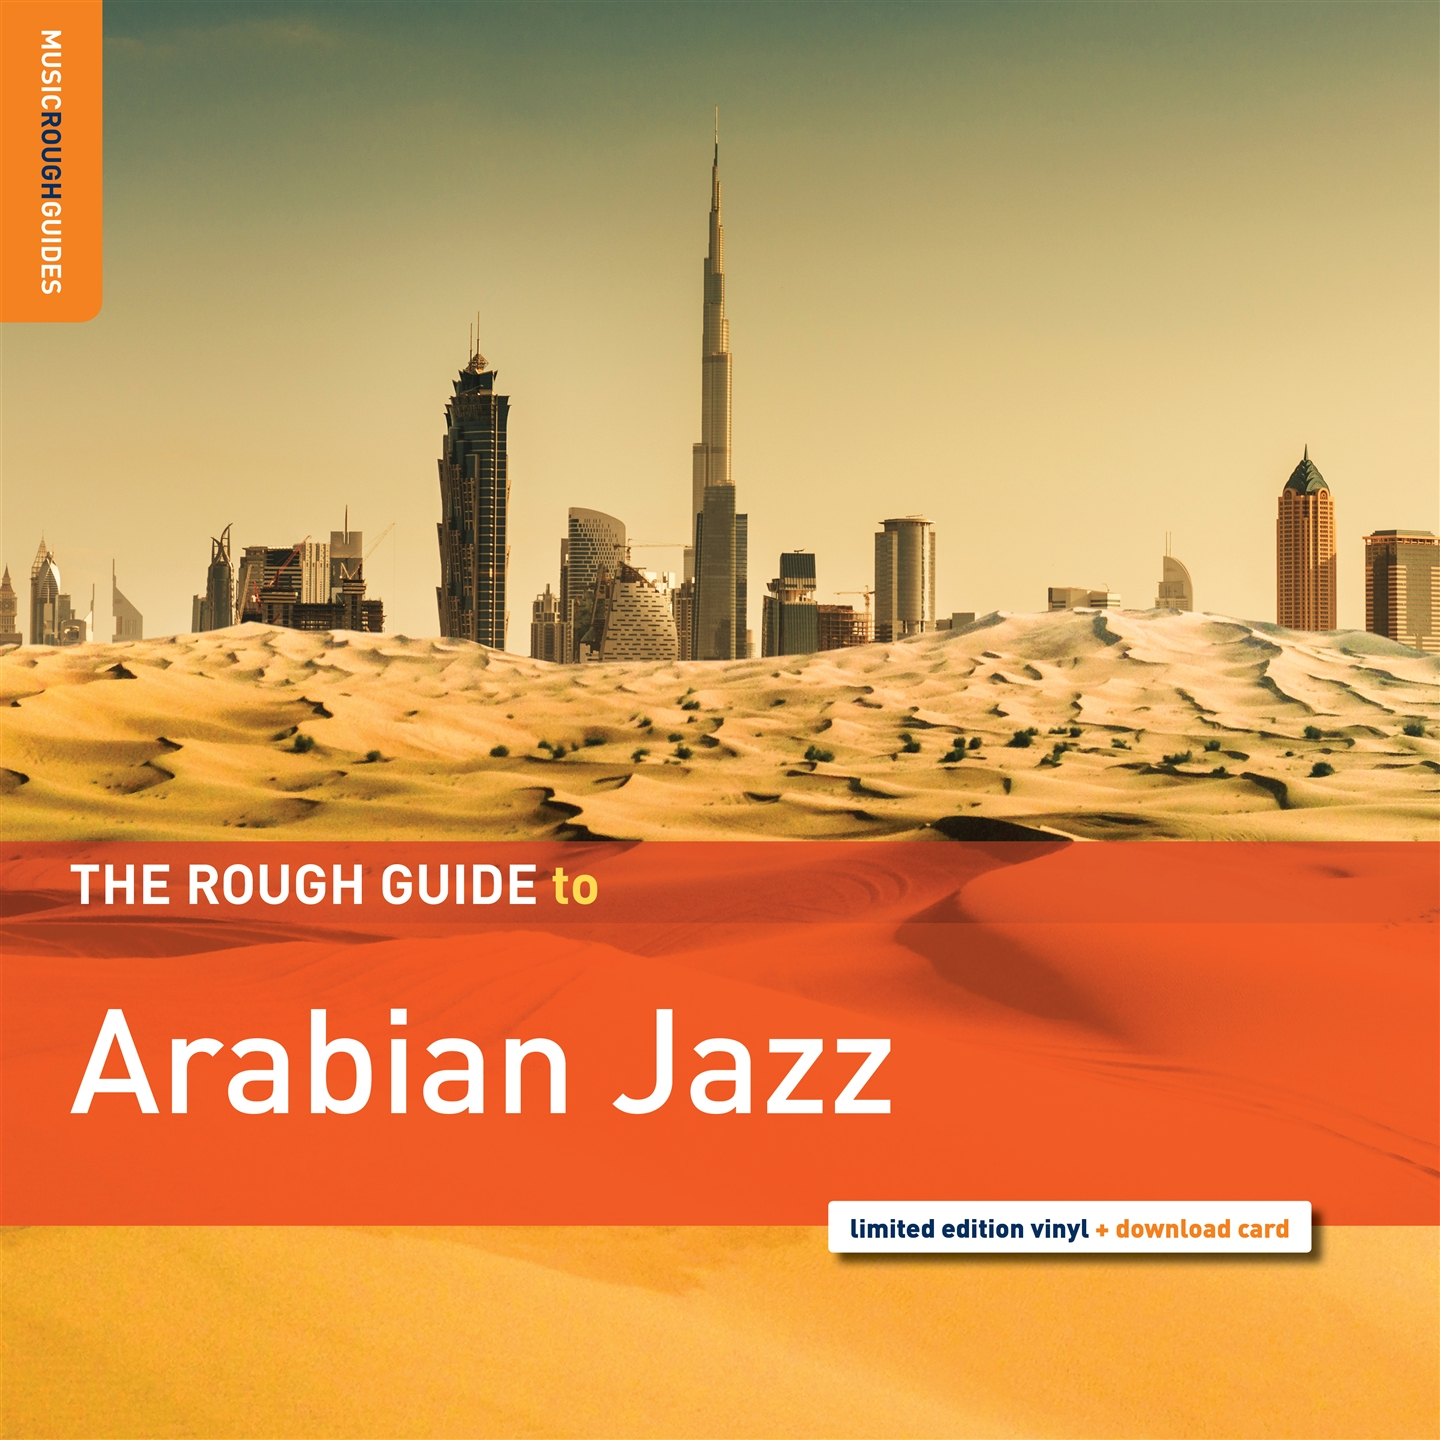 THE ROUGH GUIDE TO ARABIAN JAZZ [LP]